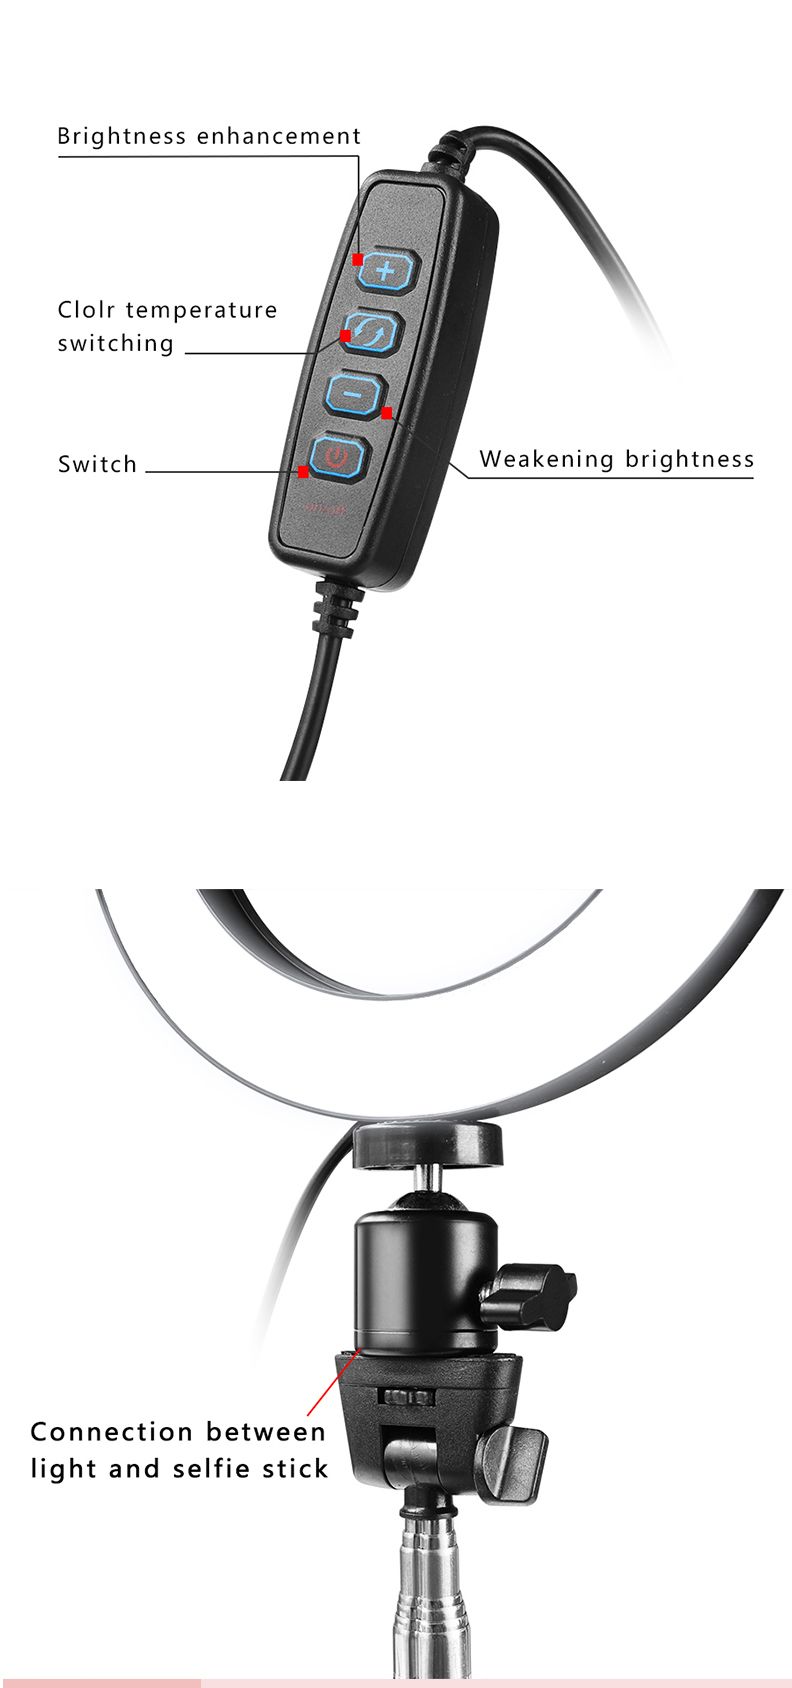 Yingnuost-Dimmable-Video-Ring-Light-20cm-LED-Makeup-Lamp-with-Selfie-Stick-Tripod-bluetooth-Shutter--1590870